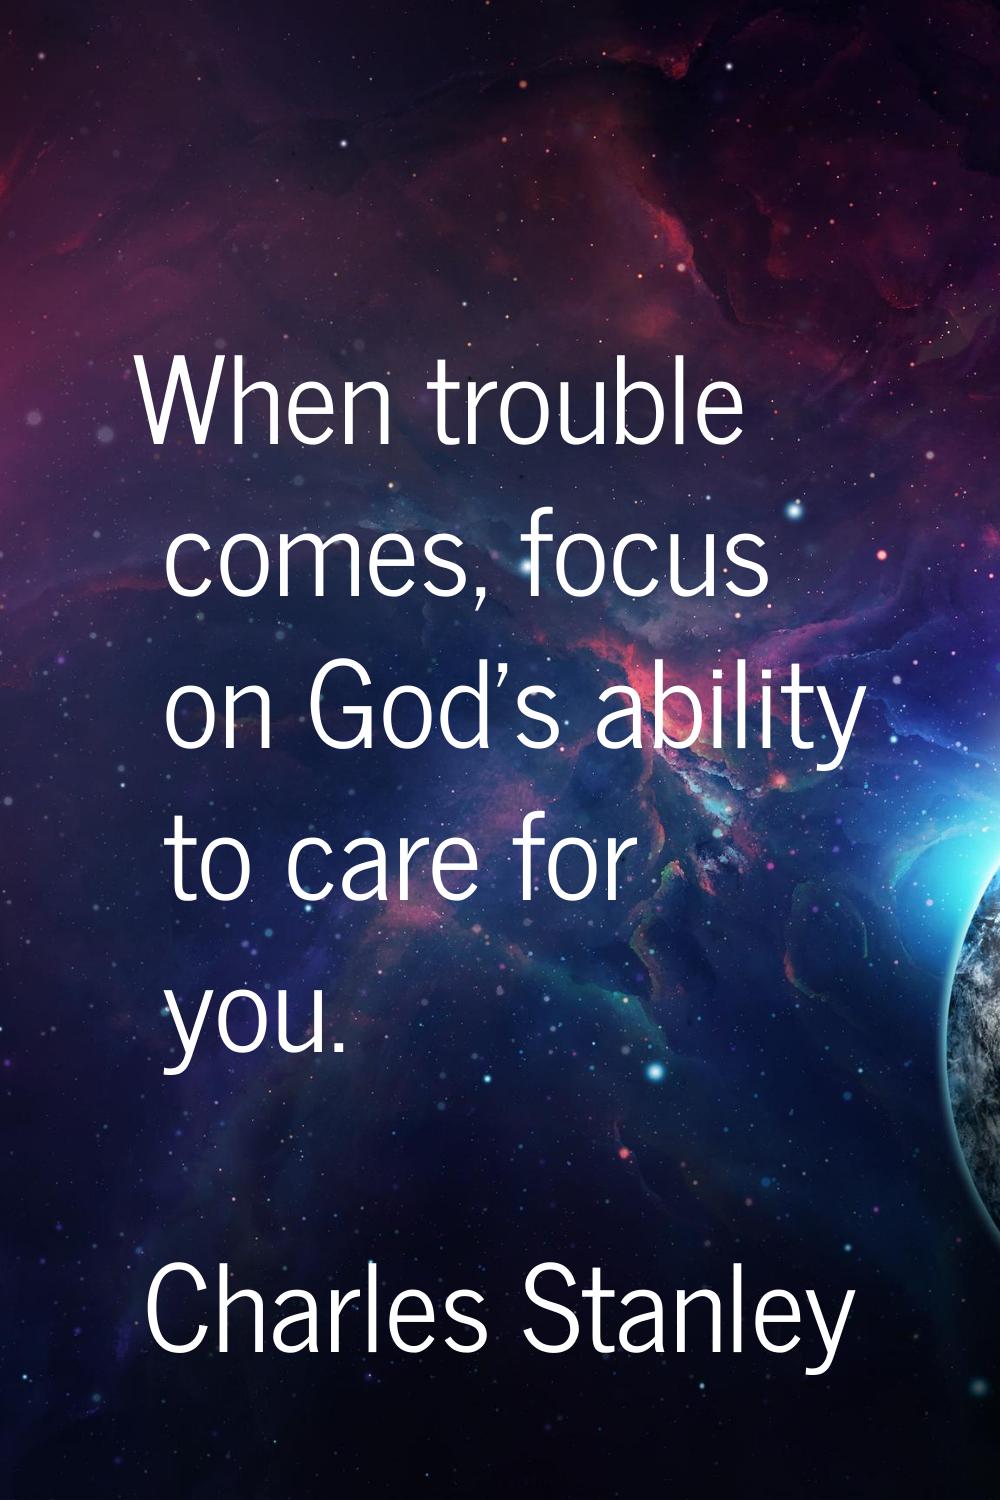 When trouble comes, focus on God's ability to care for you.